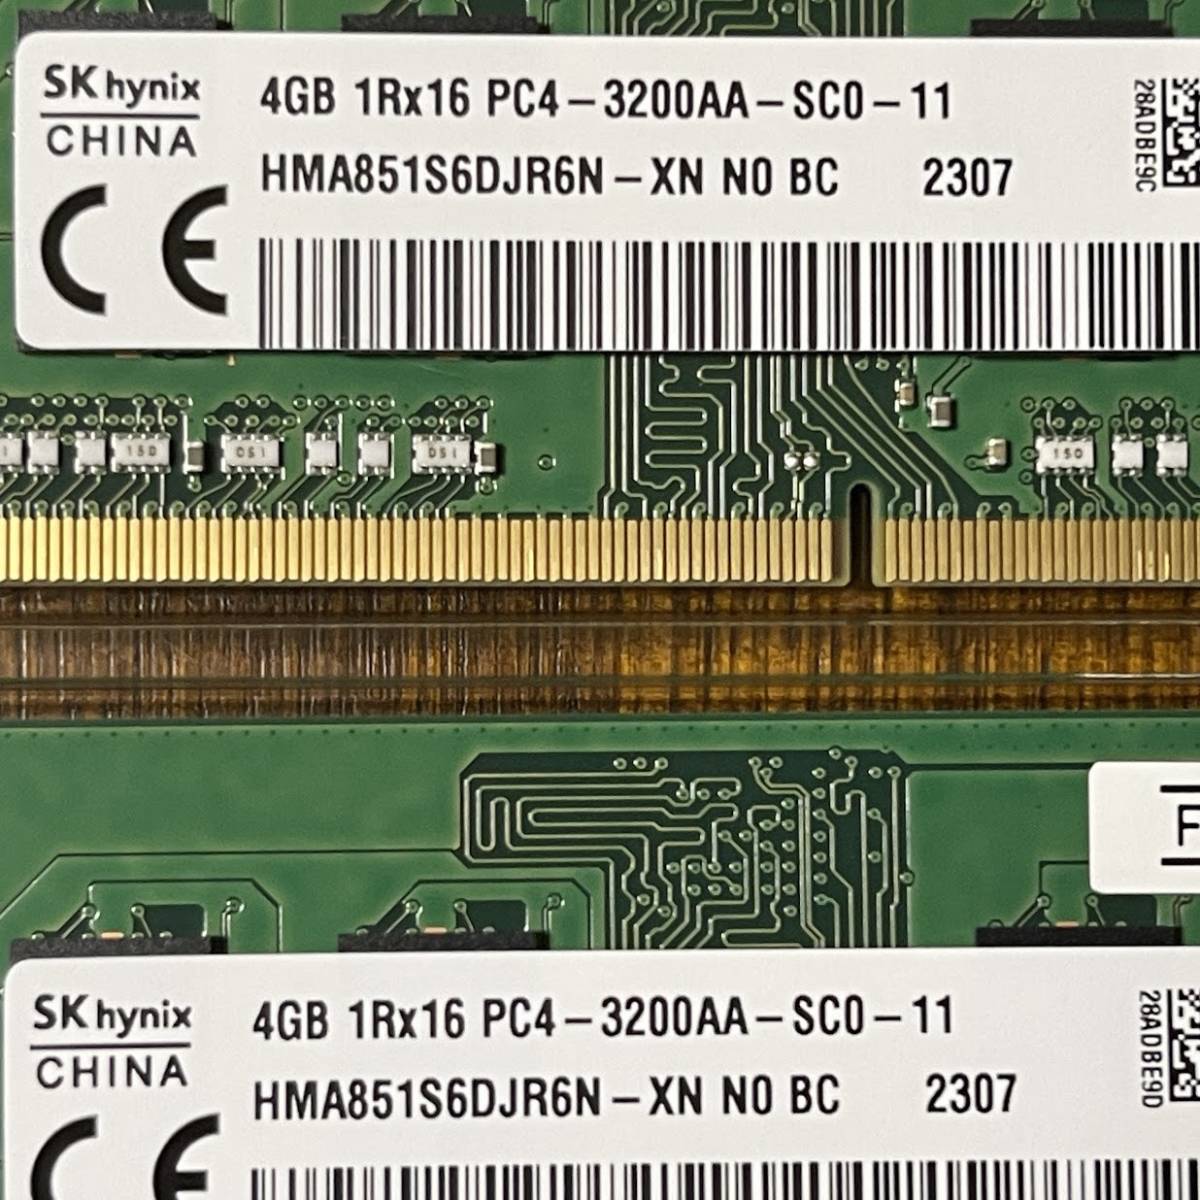 (KU) operation verification settled SK hynix (4GB 1Rx16 PC4-3200AA-SC0-11)x2 sheets total 8GB complete same one standard set Note PC thin type desk top pc combined use memory Junk